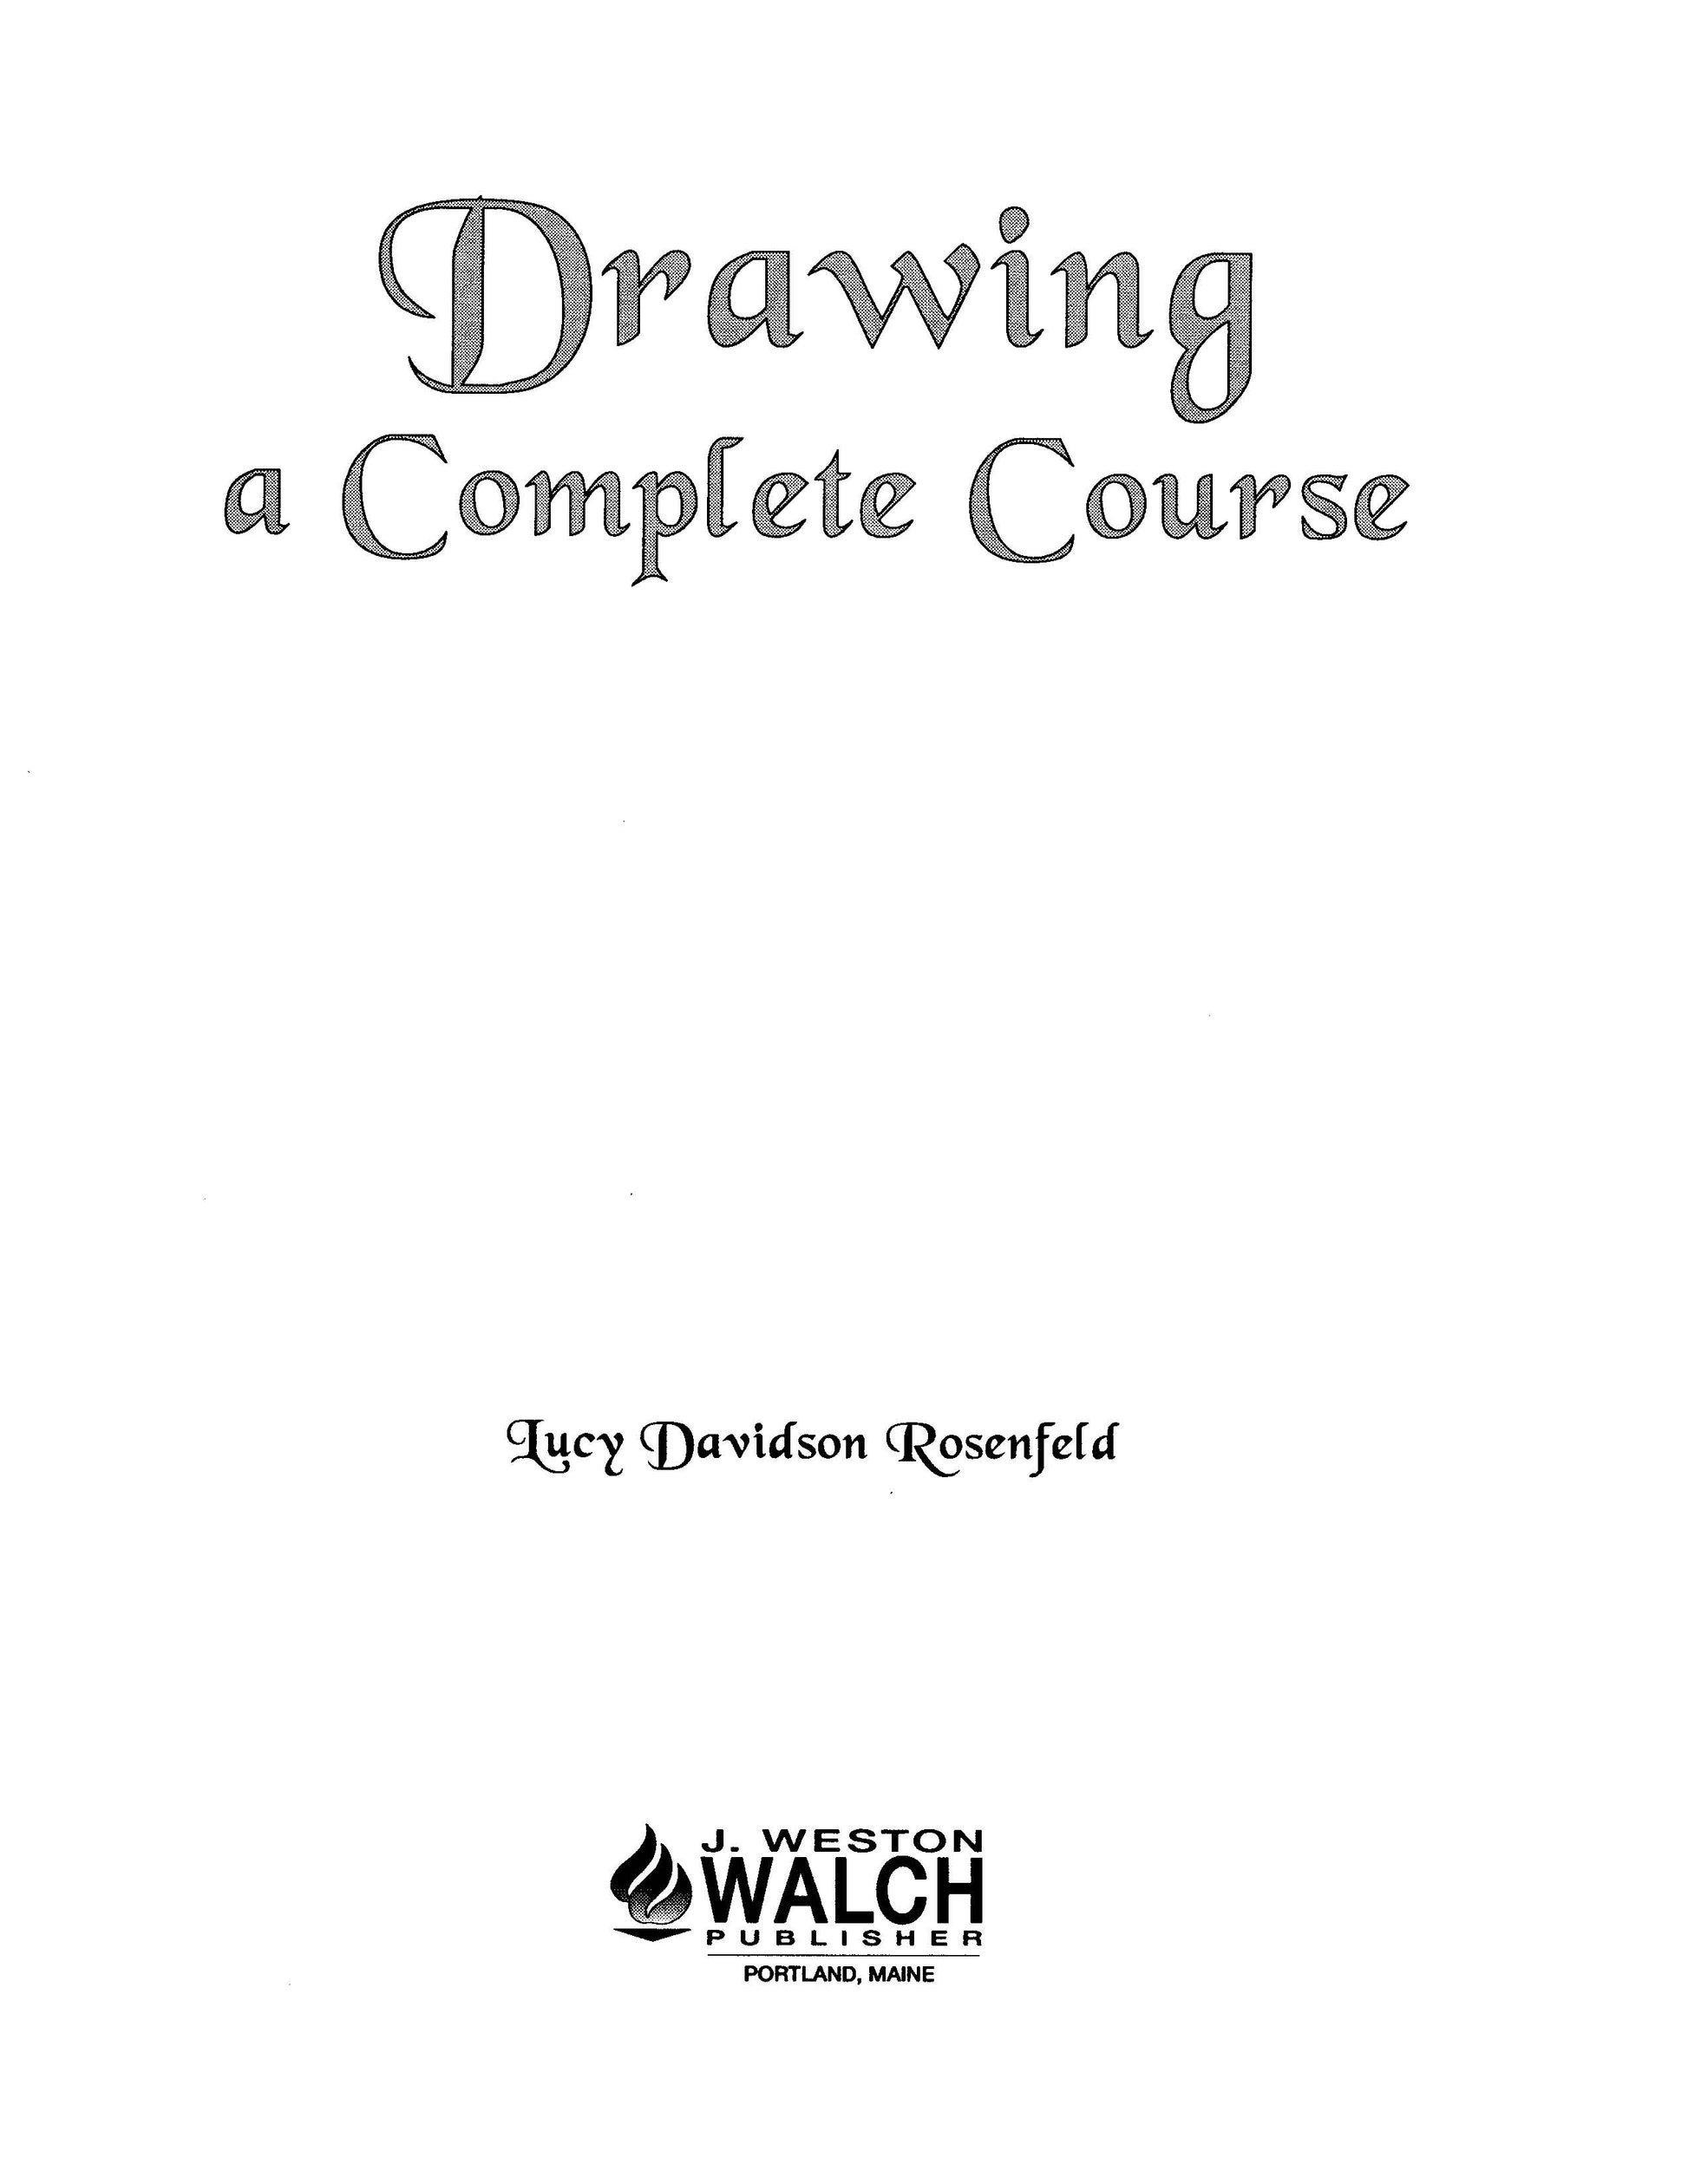 Bright Education Australia, Teacher Resources, Visual Art, Art, Book, drawing, painting,Drawing: A Complete Course